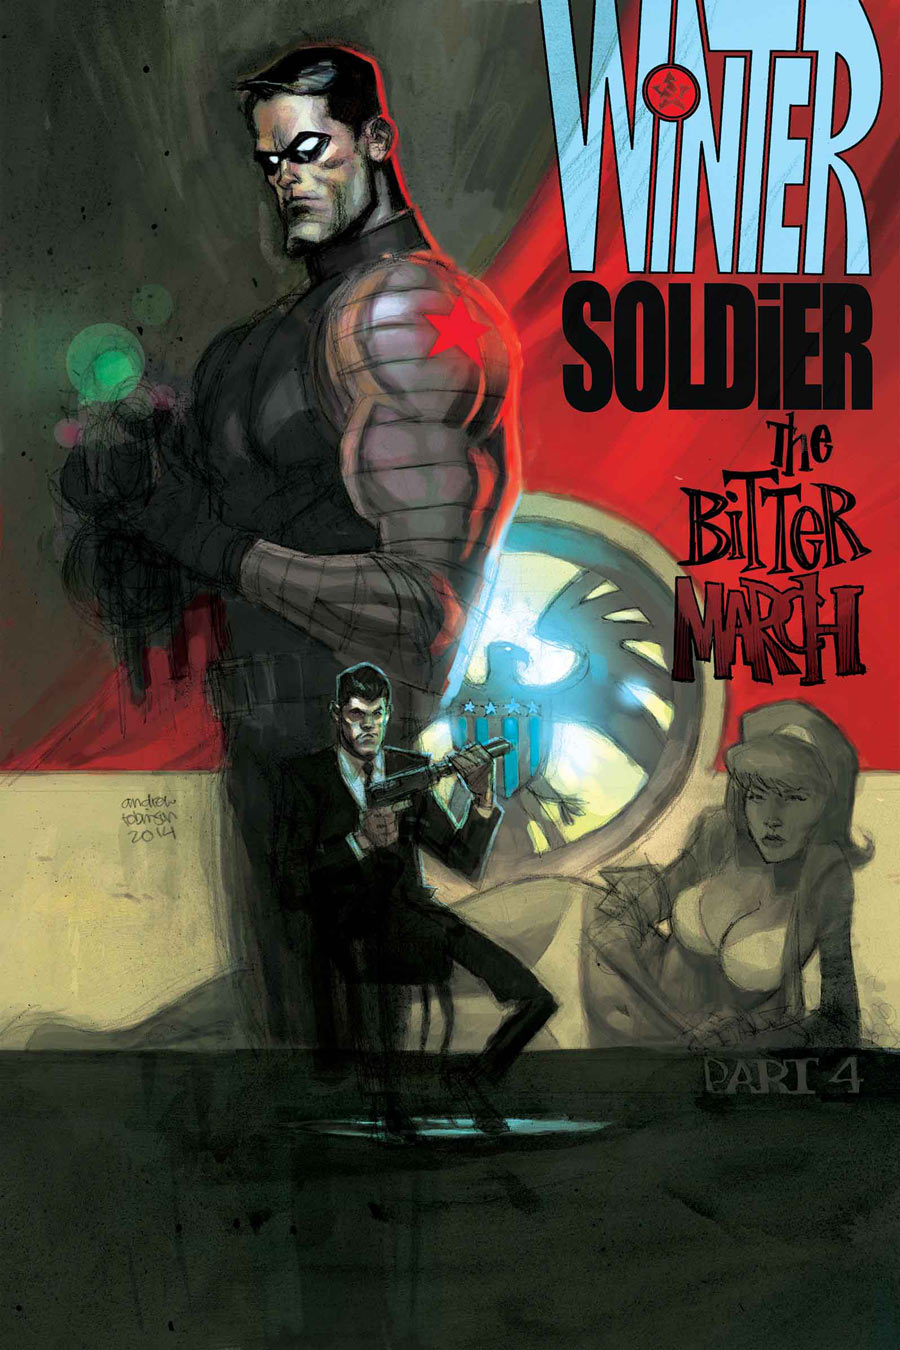 WINTER SOLDIER: THE BITTER MARCH #4 (of 5)